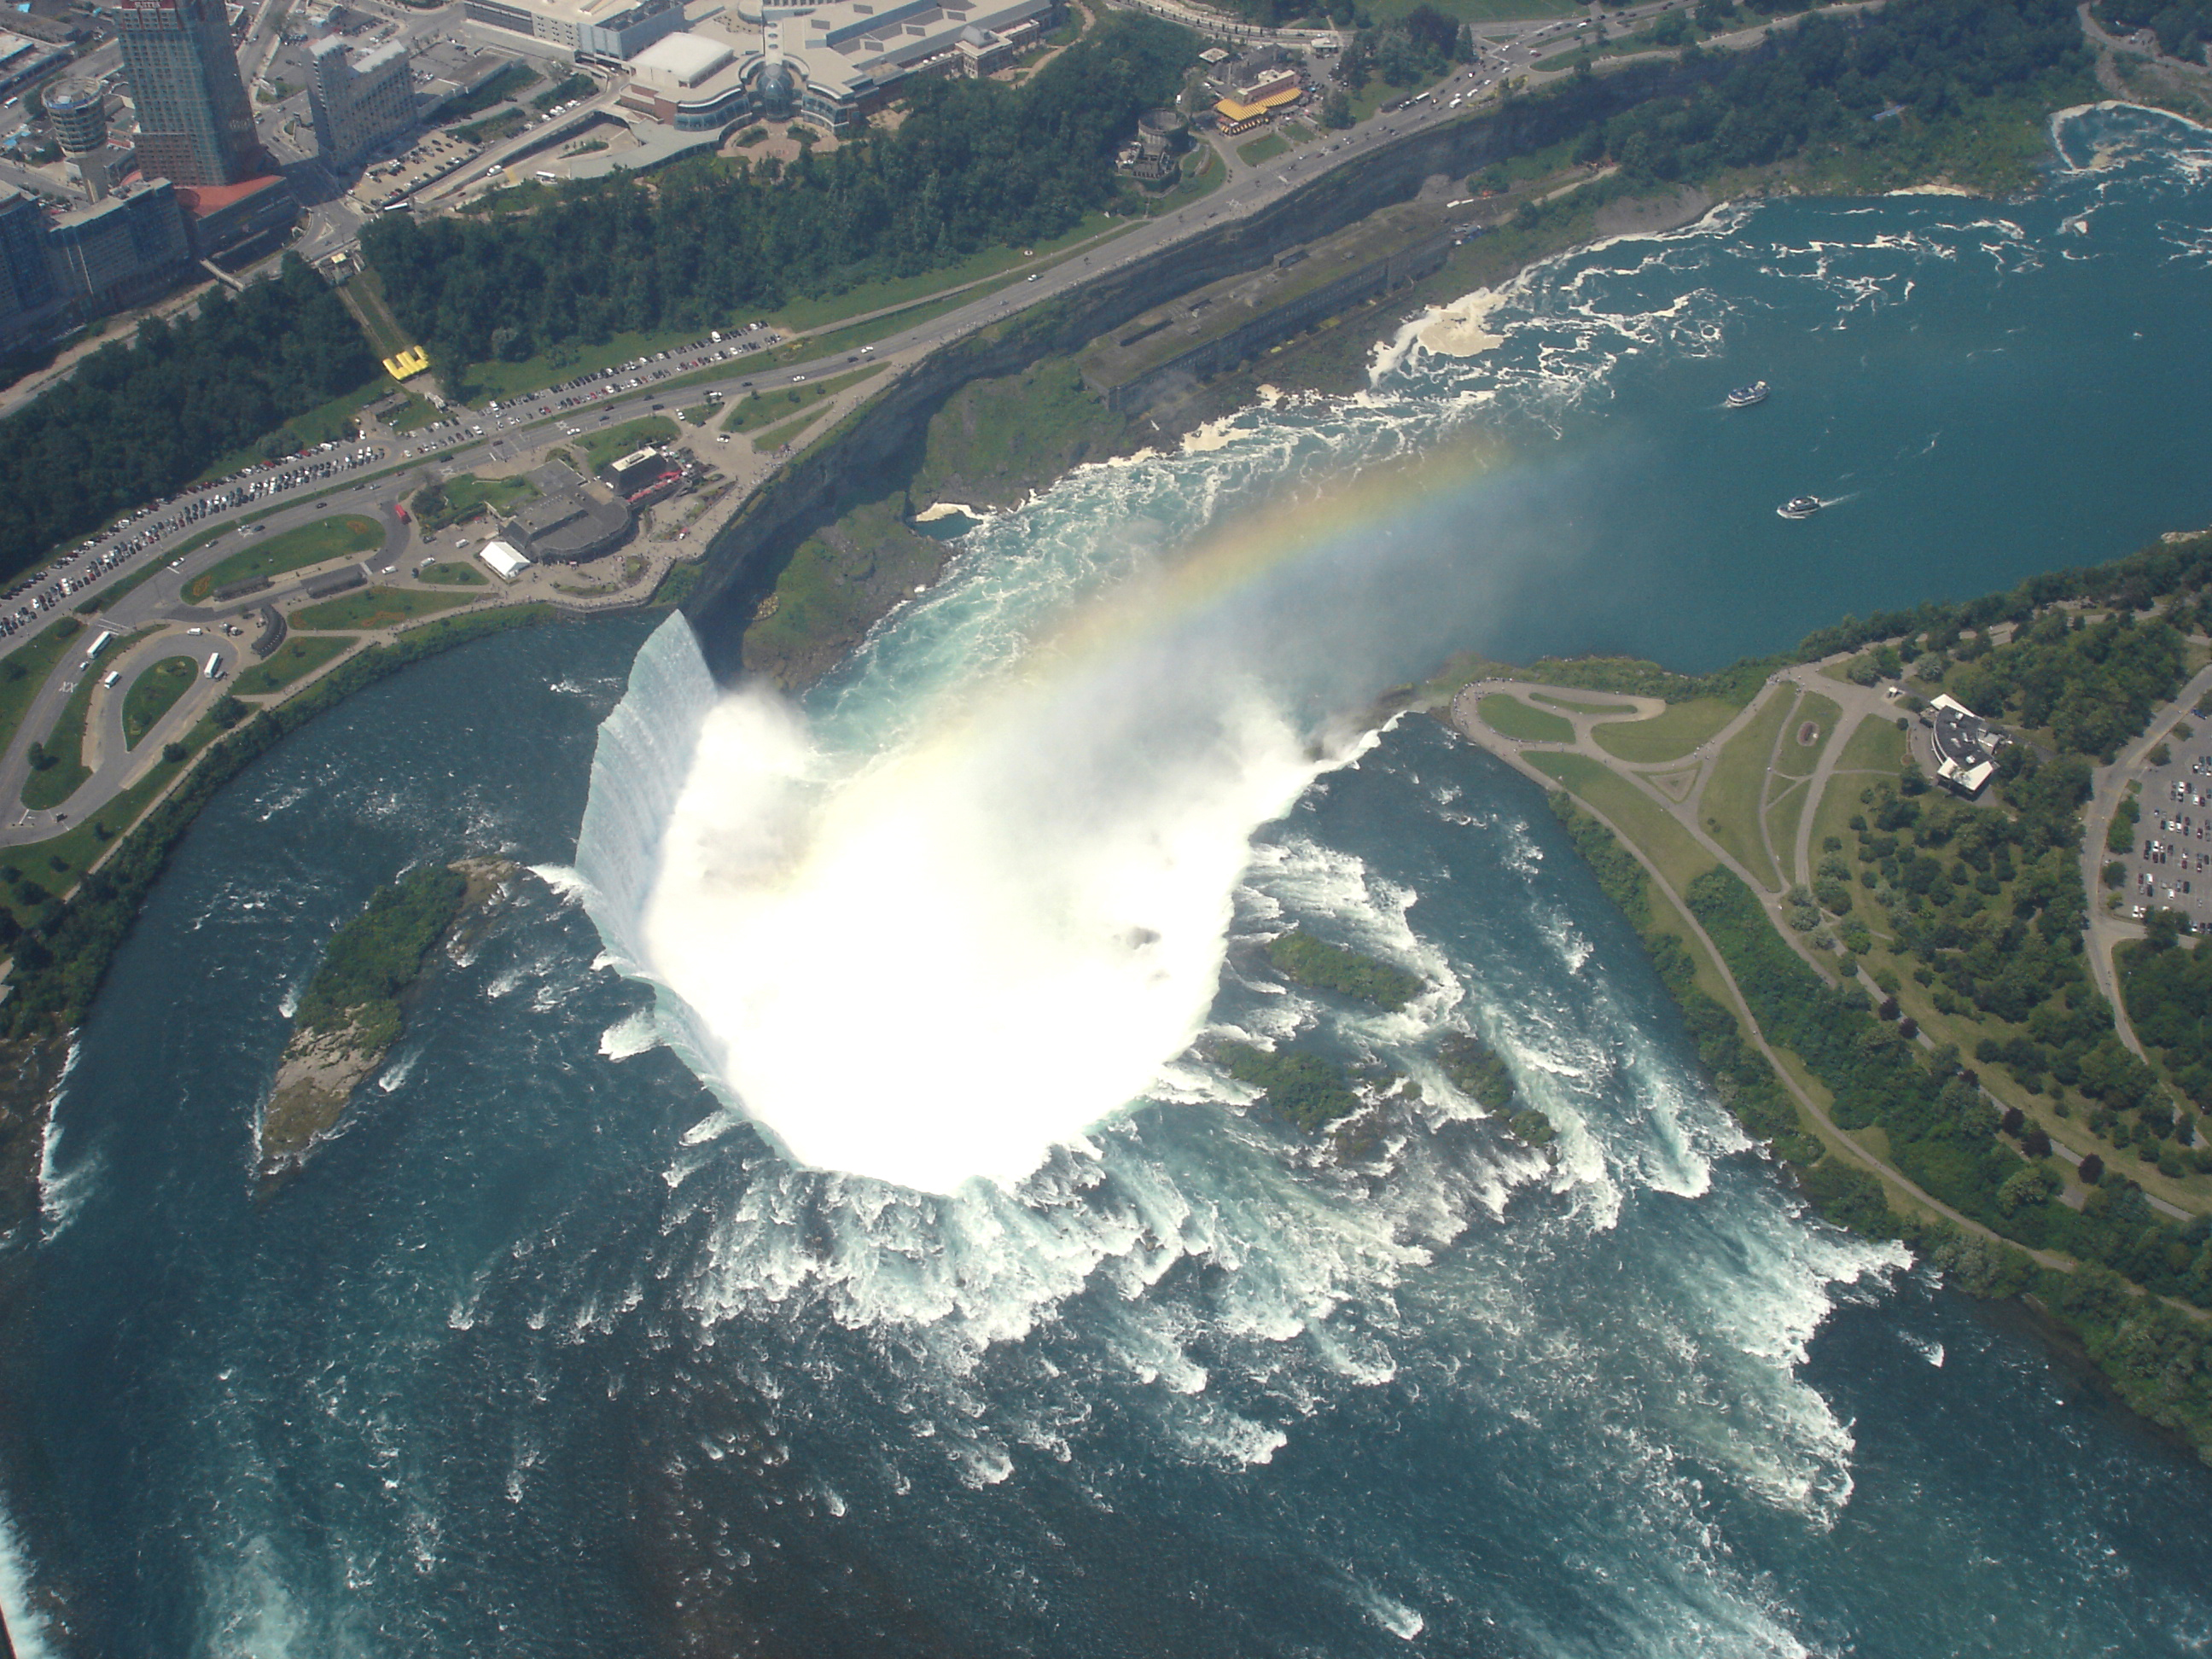 Horseshoe Falls from helicopter